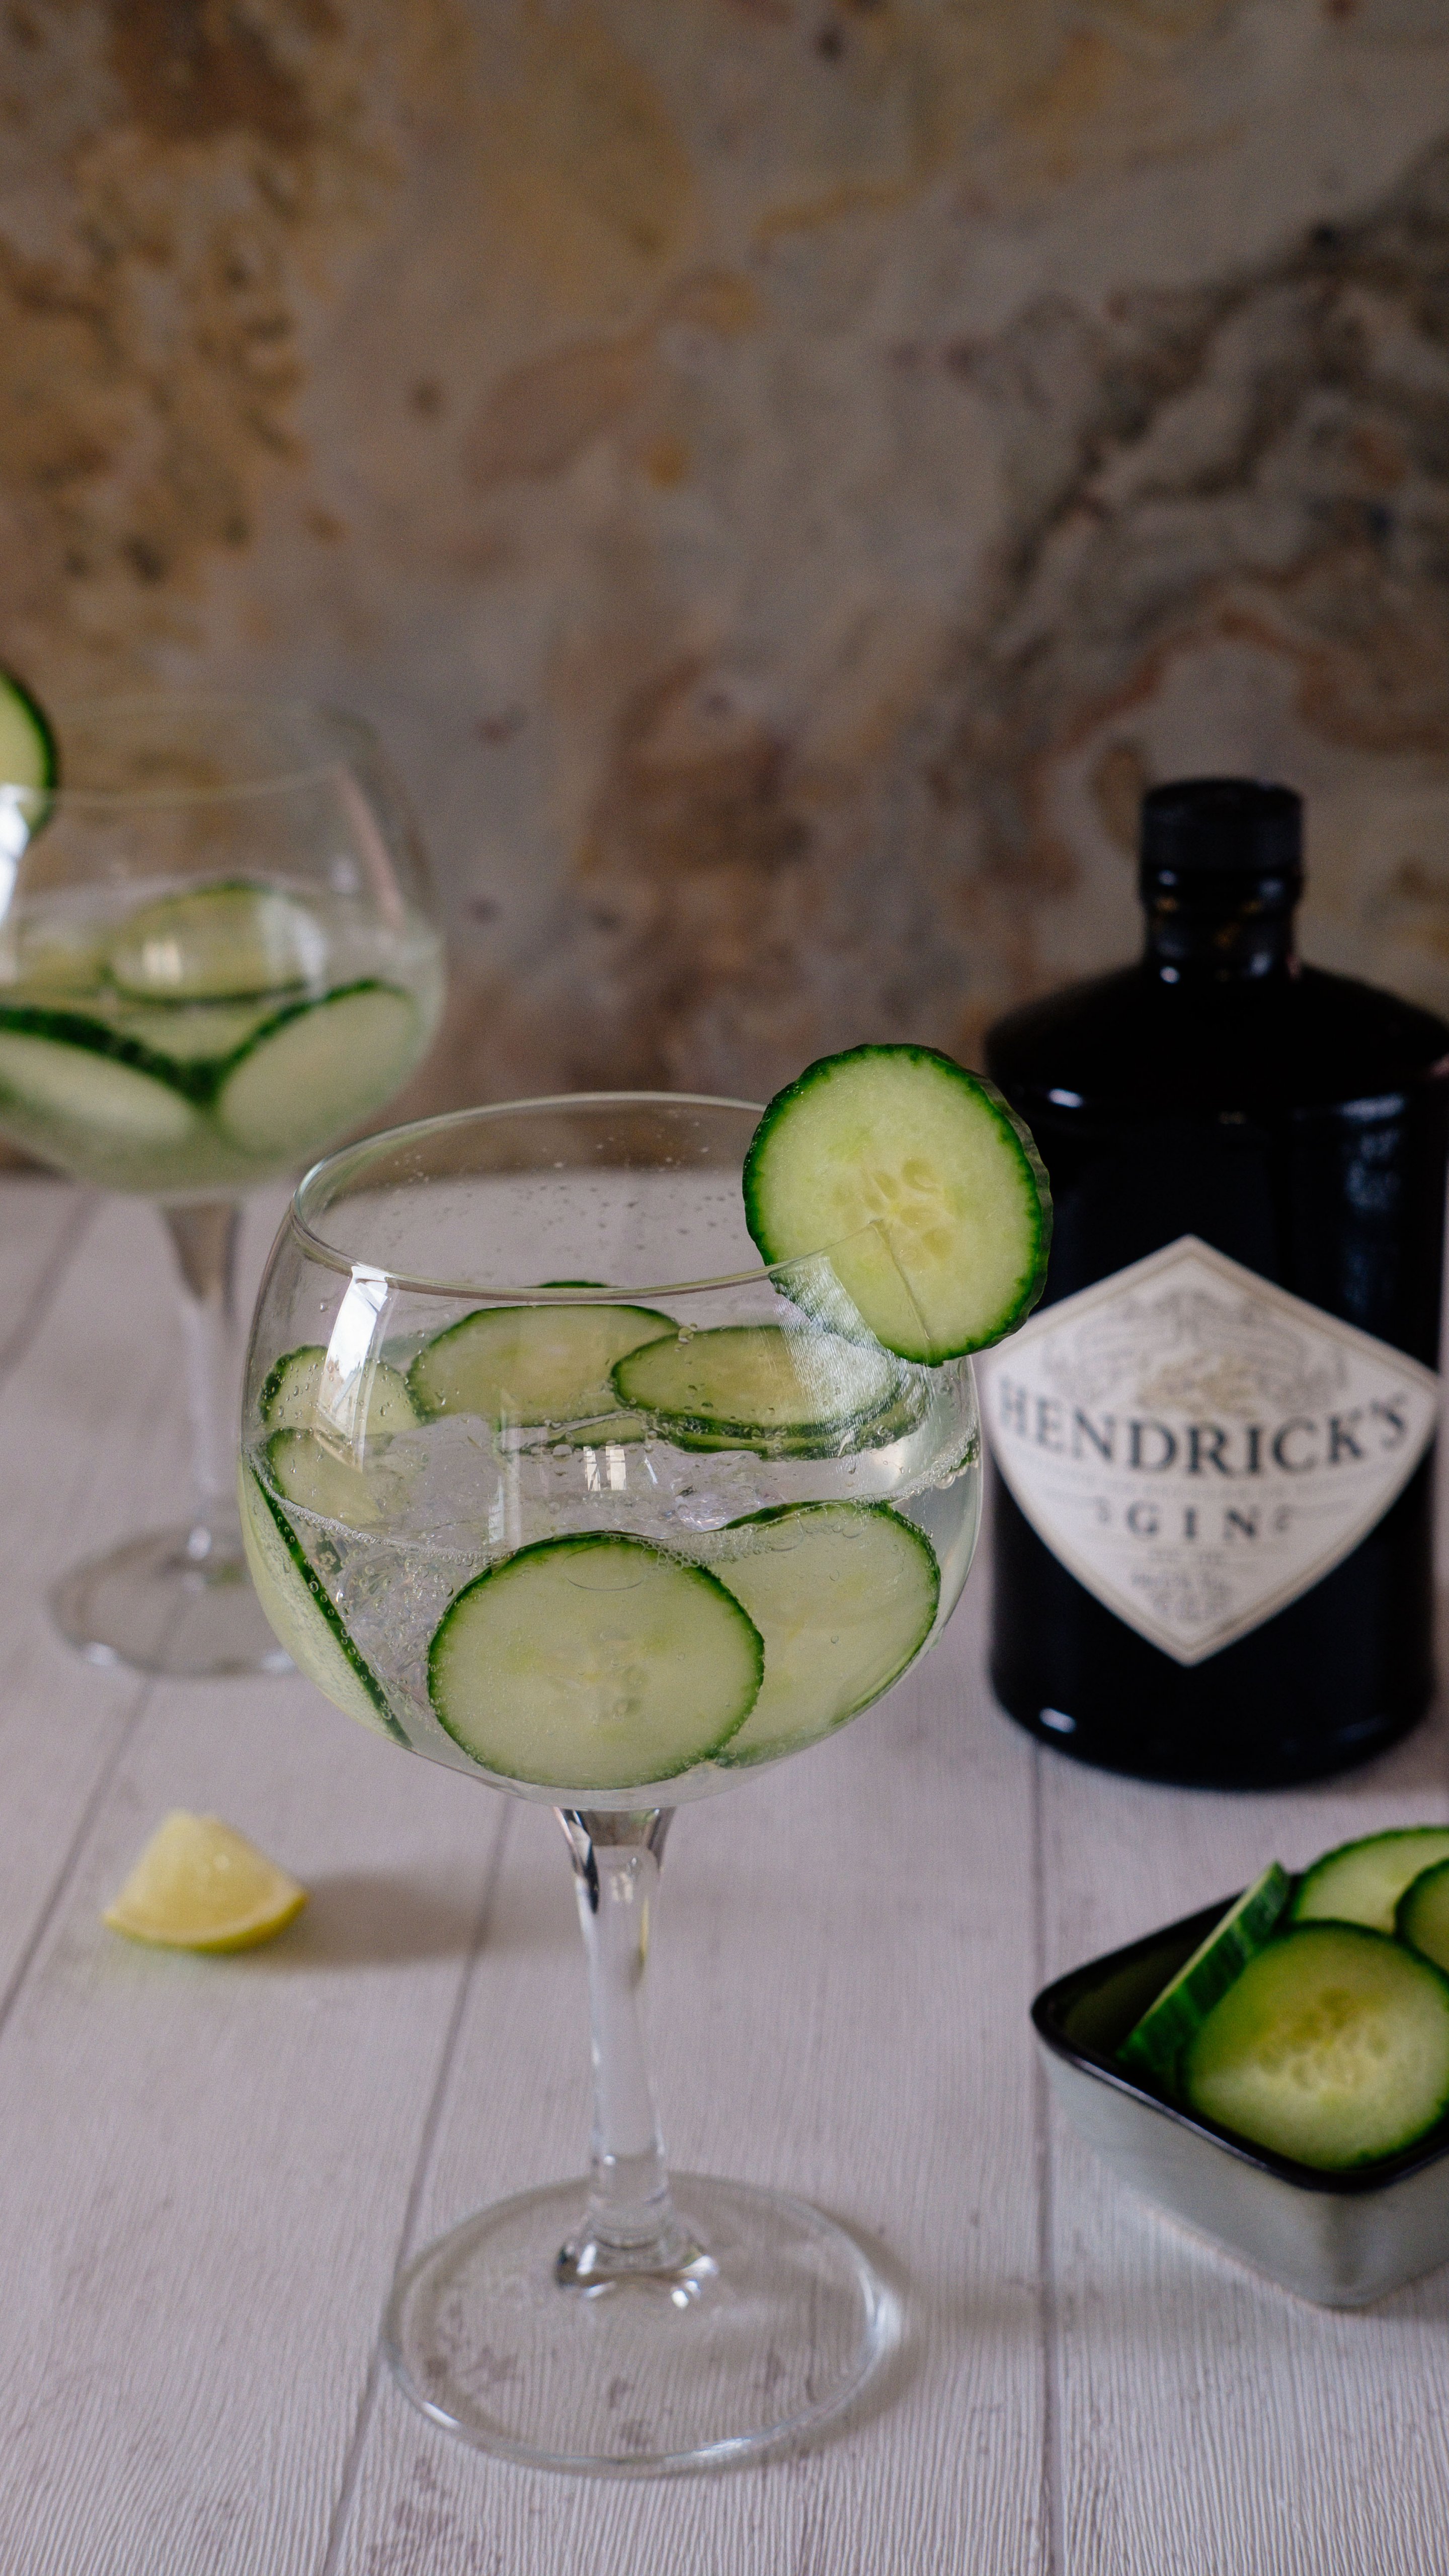 Fever Tree Gin and Tonic Recipe